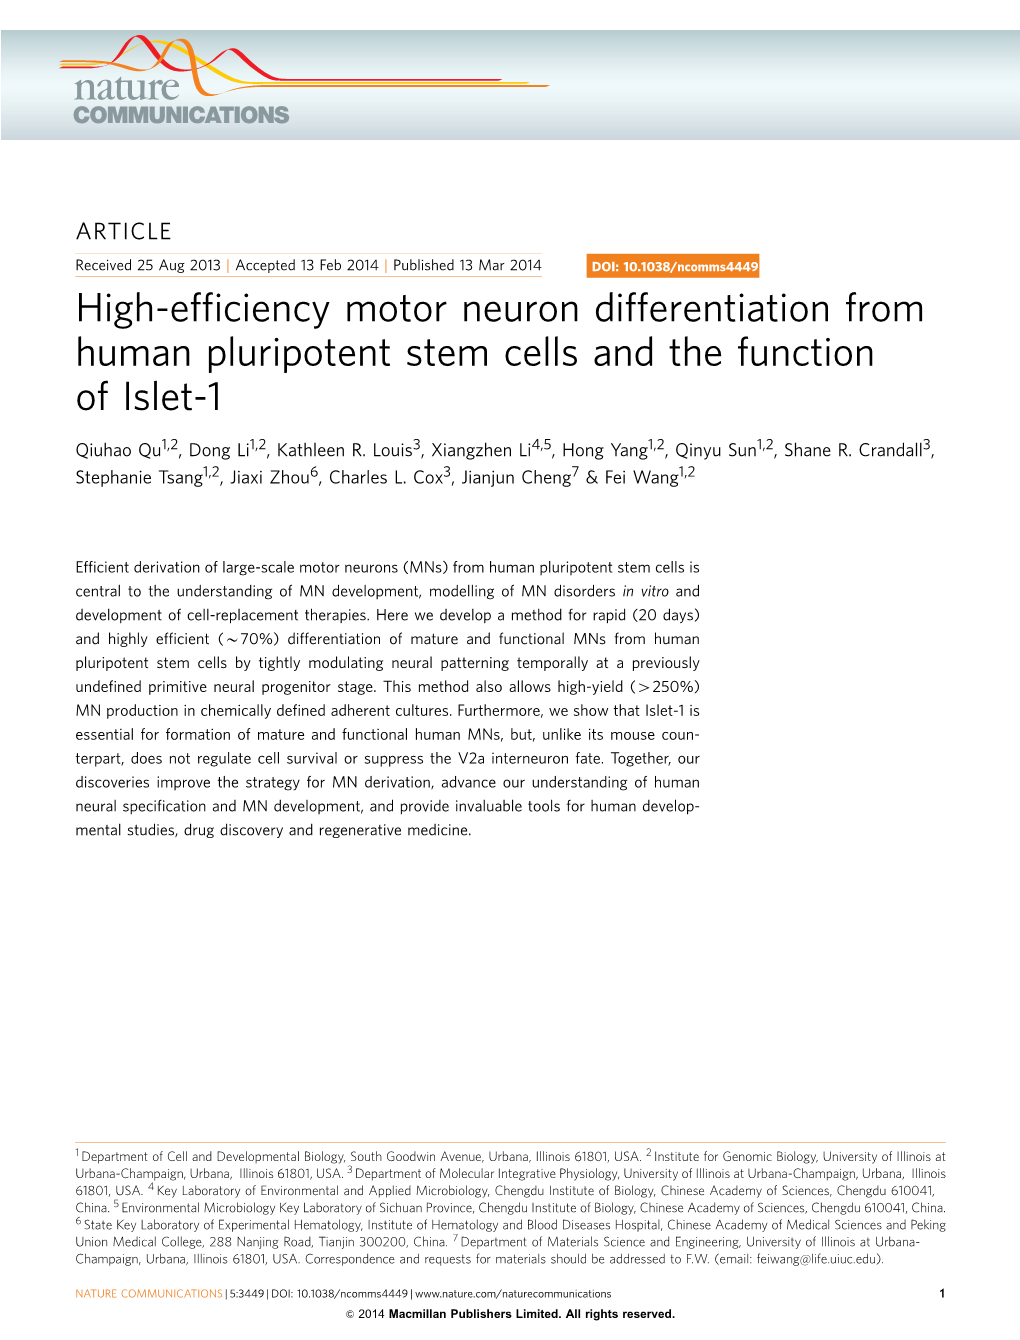 High-Efficiency Motor Neuron Differentiation from Human